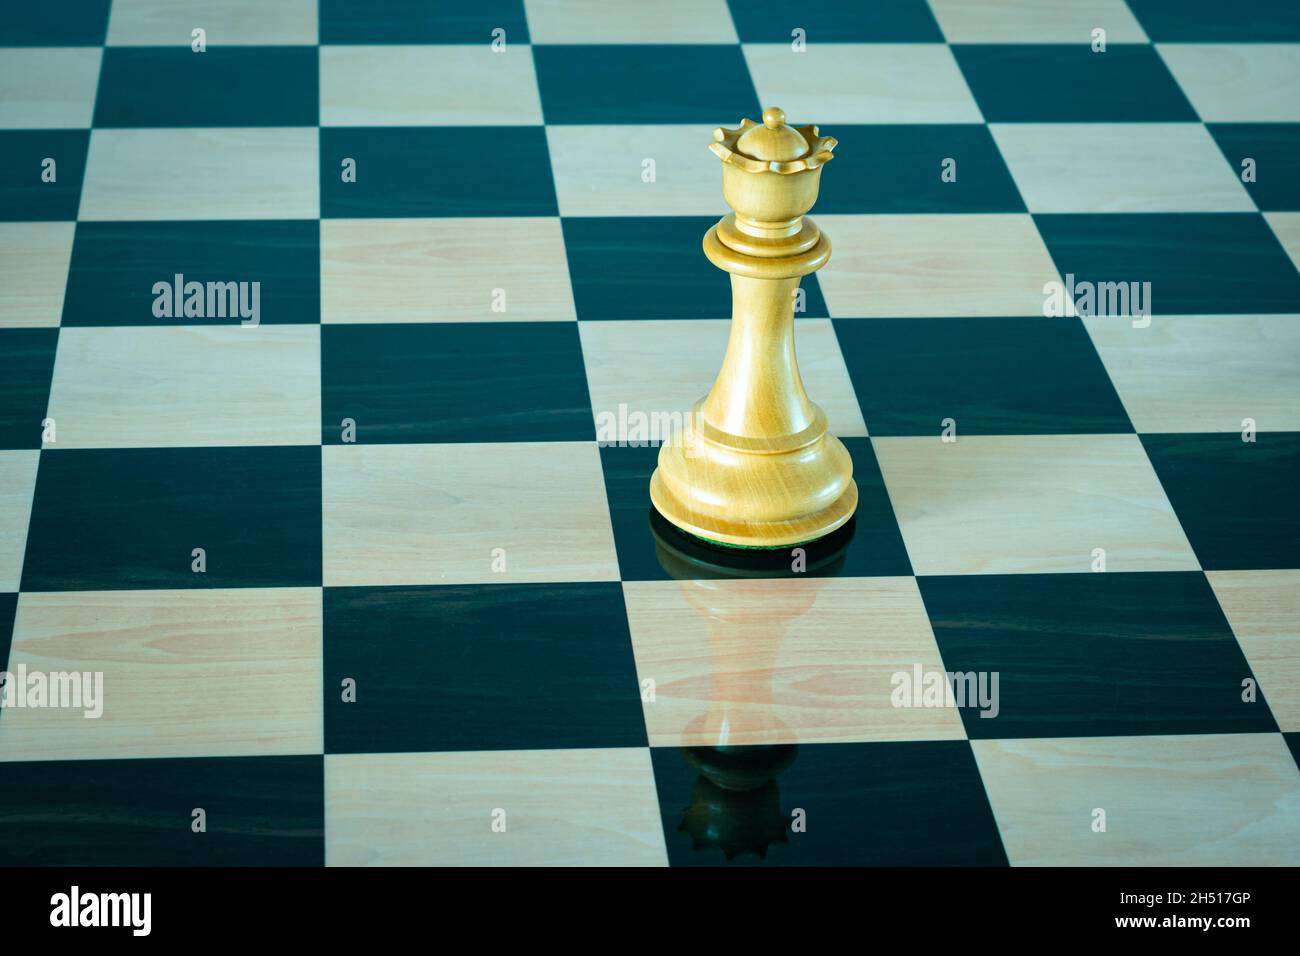 White queen on a chess board. Chess piece. Stock Photo